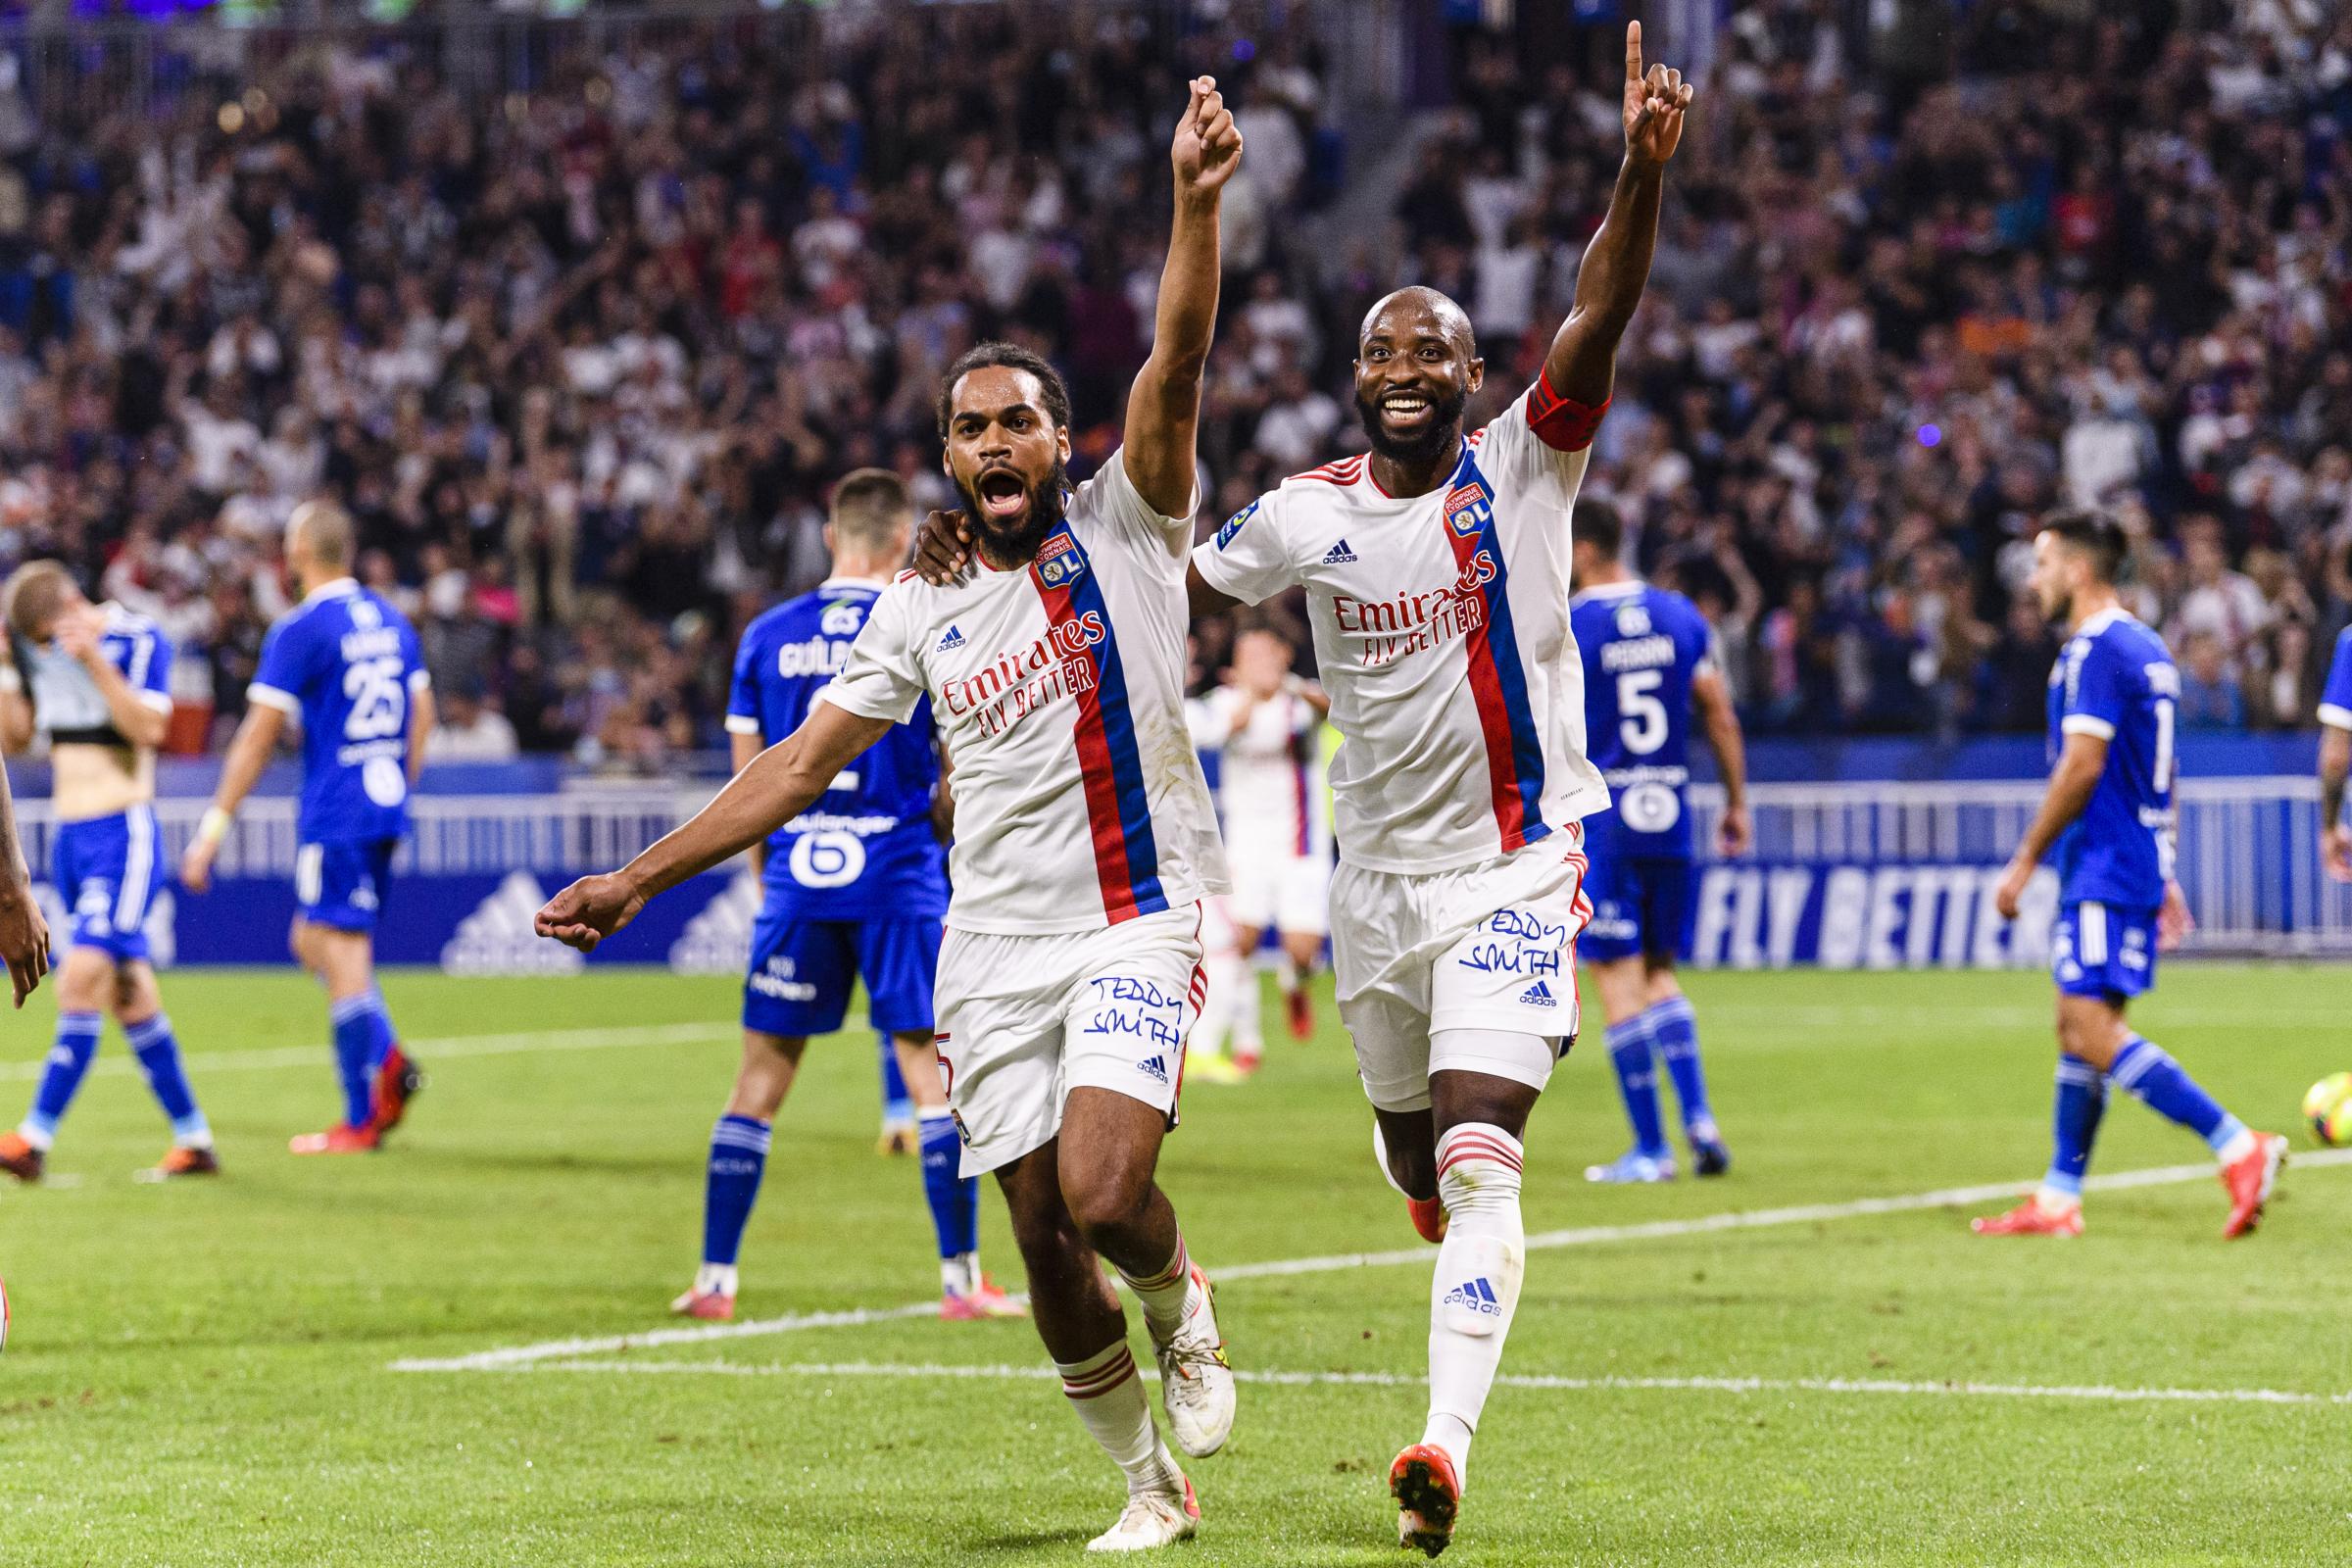 They can make them cry: French football expert on why Rangers can stun Lyon in Europa League opener